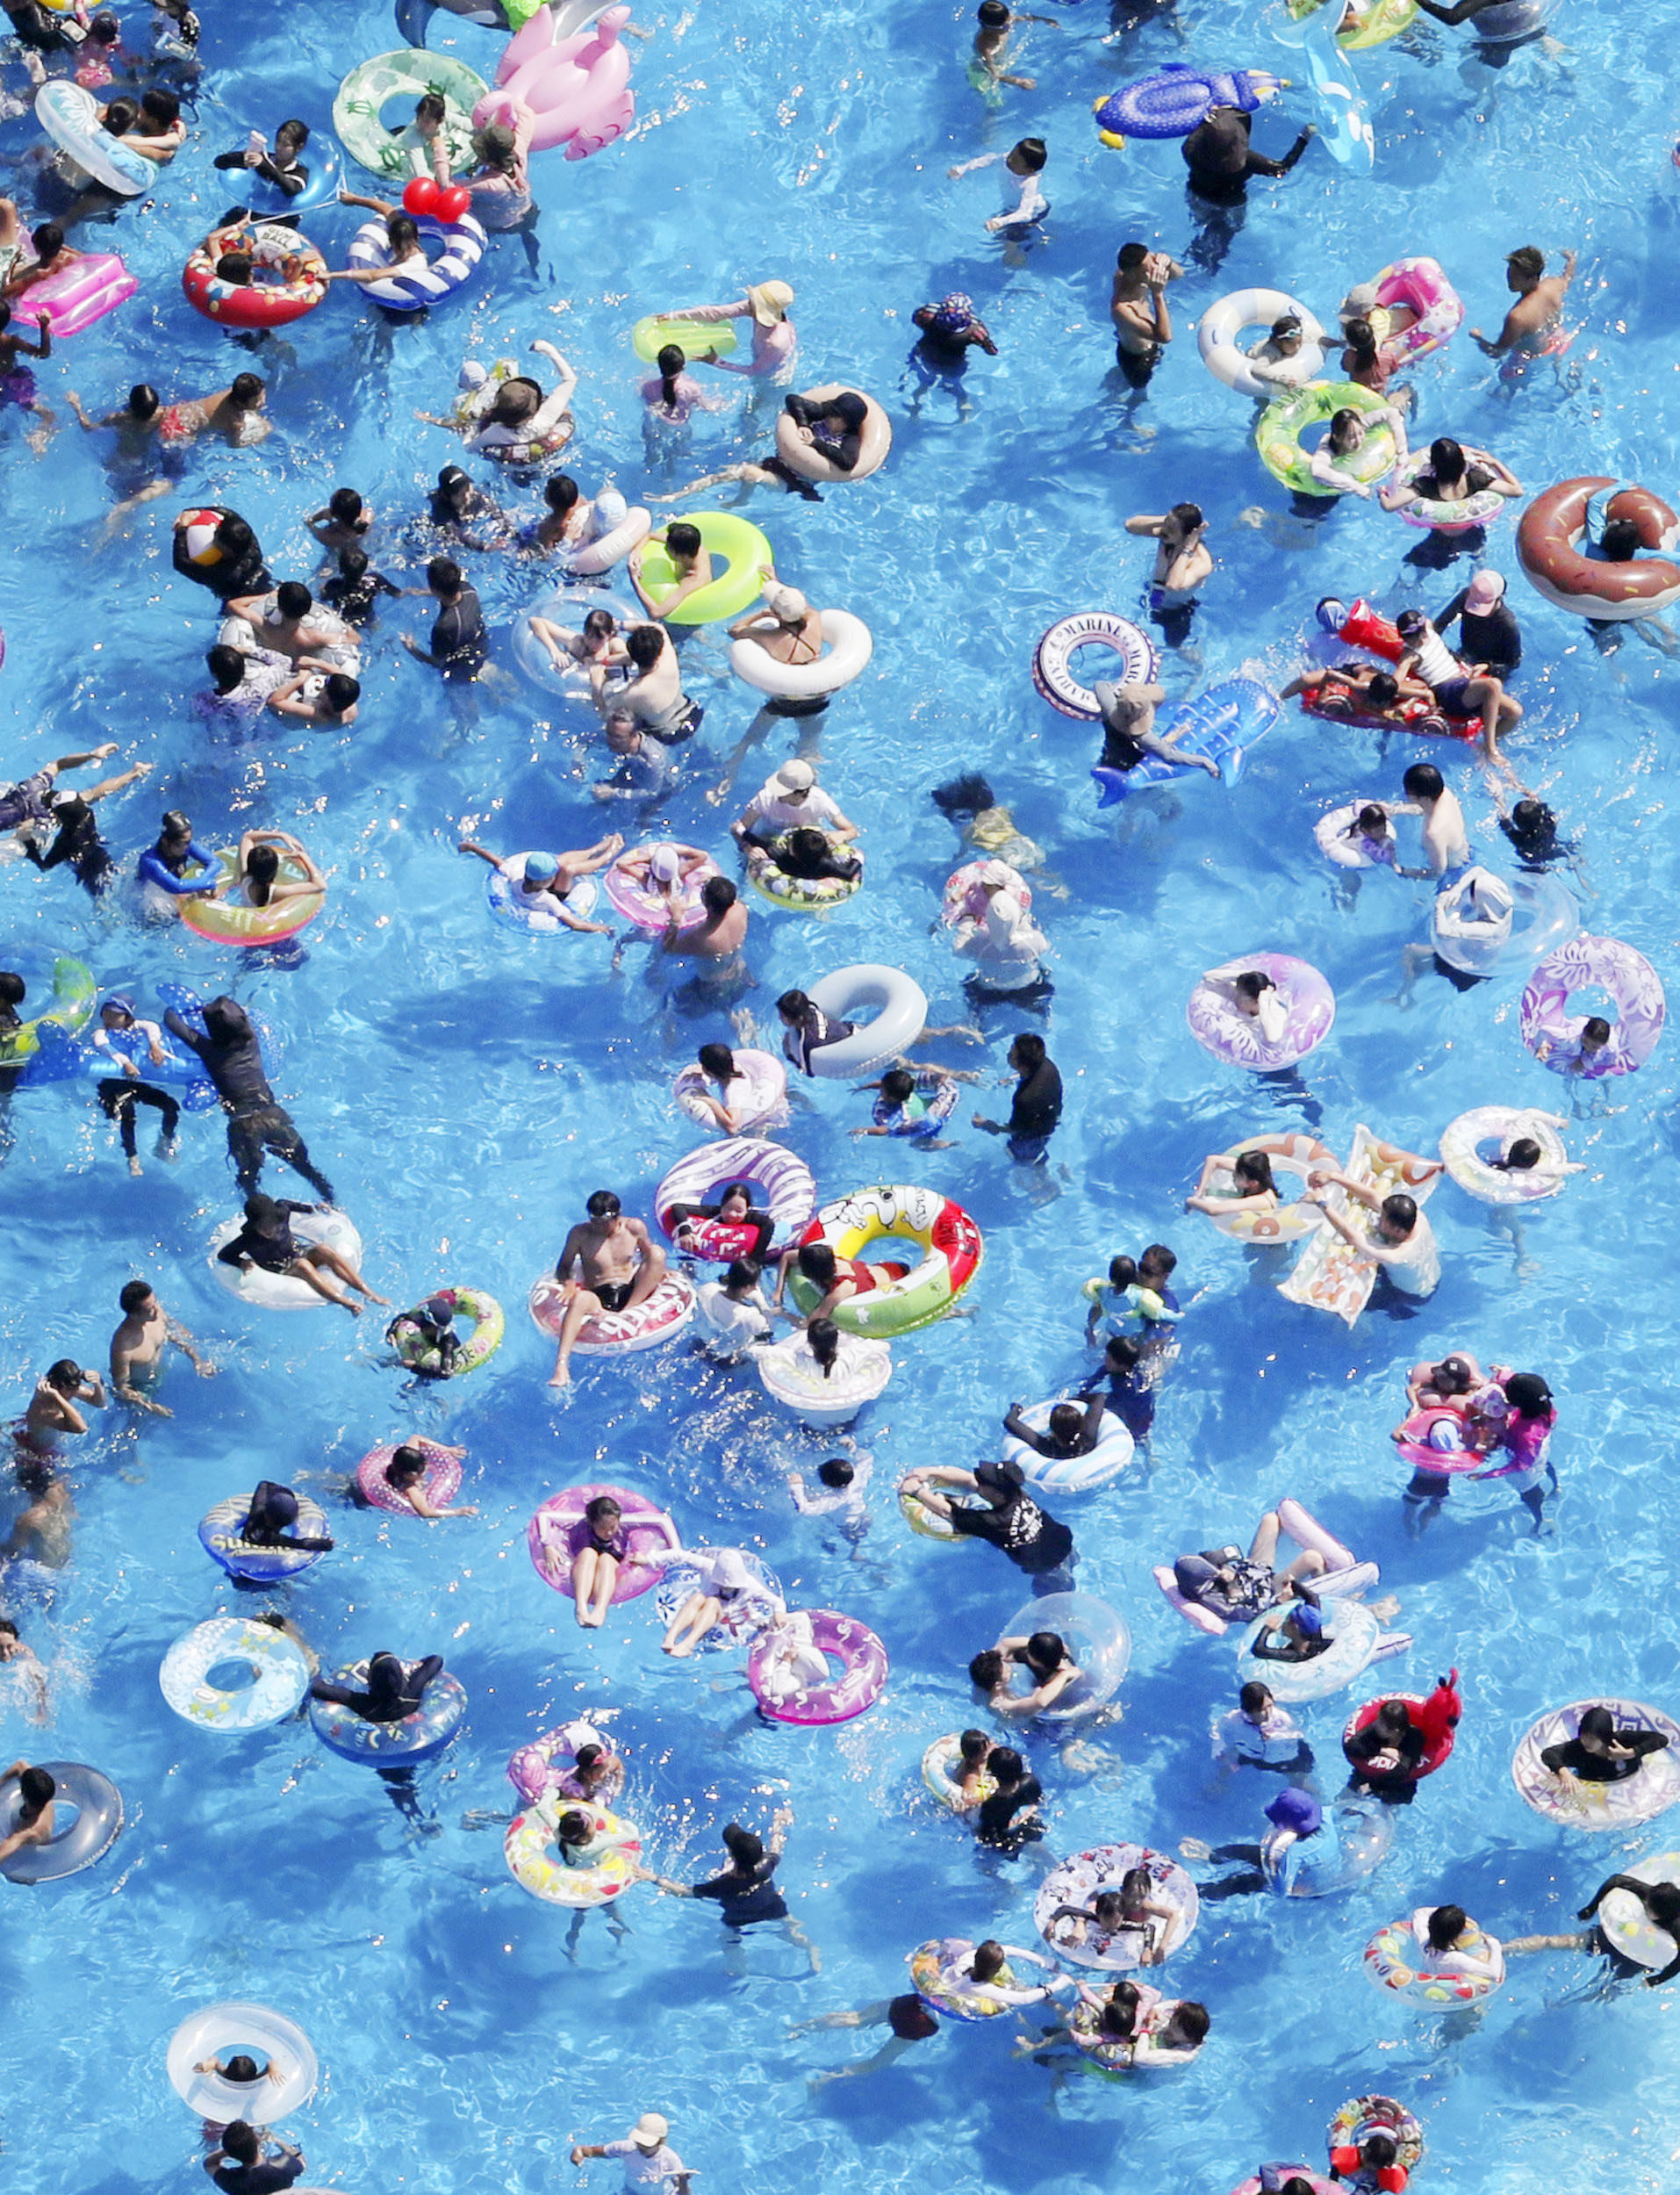 This year has seen the hottest June, the hottest day in recorded history – a record broken 16 times in July, wildfires, storms and floods. Above: Swimmers crowd into a pool near Tokyo on July 26, 2023, amid scorching summer heat. Photo: Kyodo